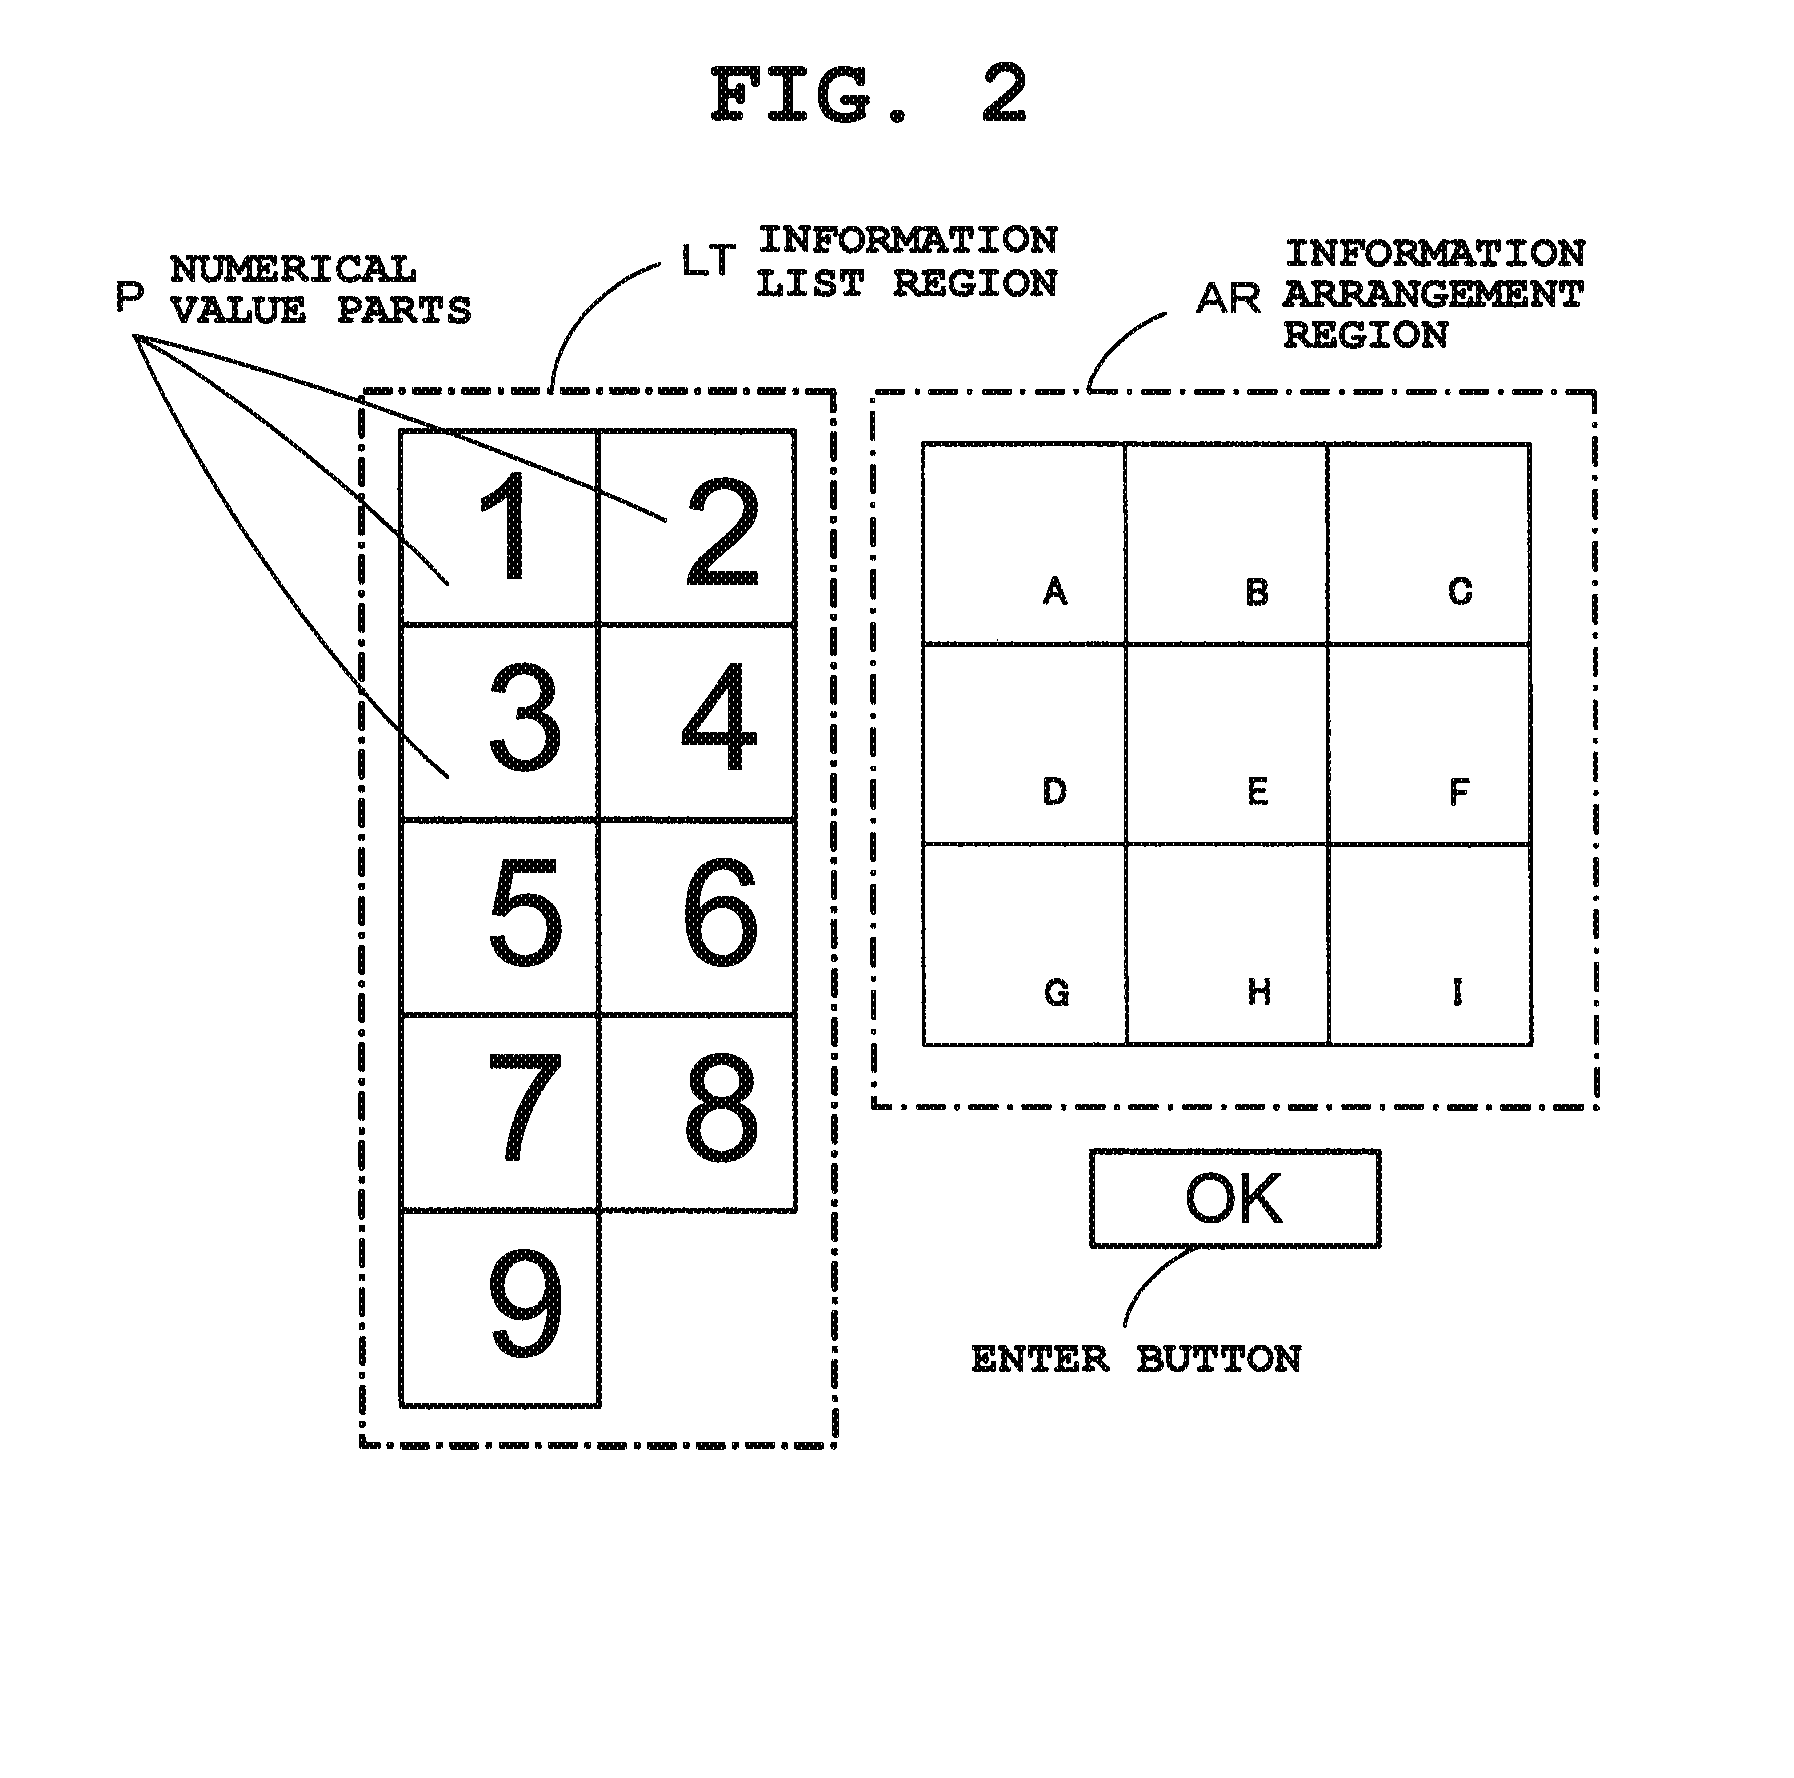 Authentication processing device for performing authentication processing